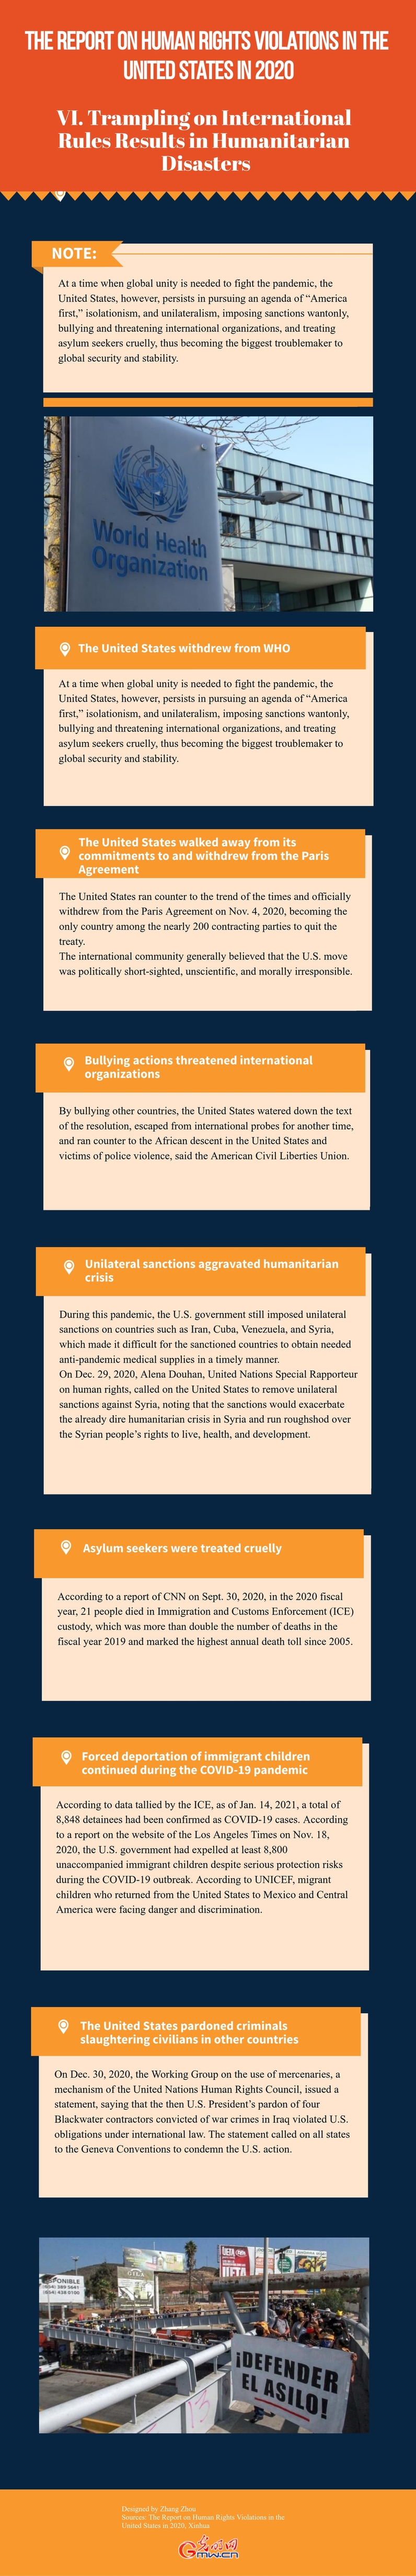 Infographic: Trampling on International Rules Results in Humanitarian Disasters